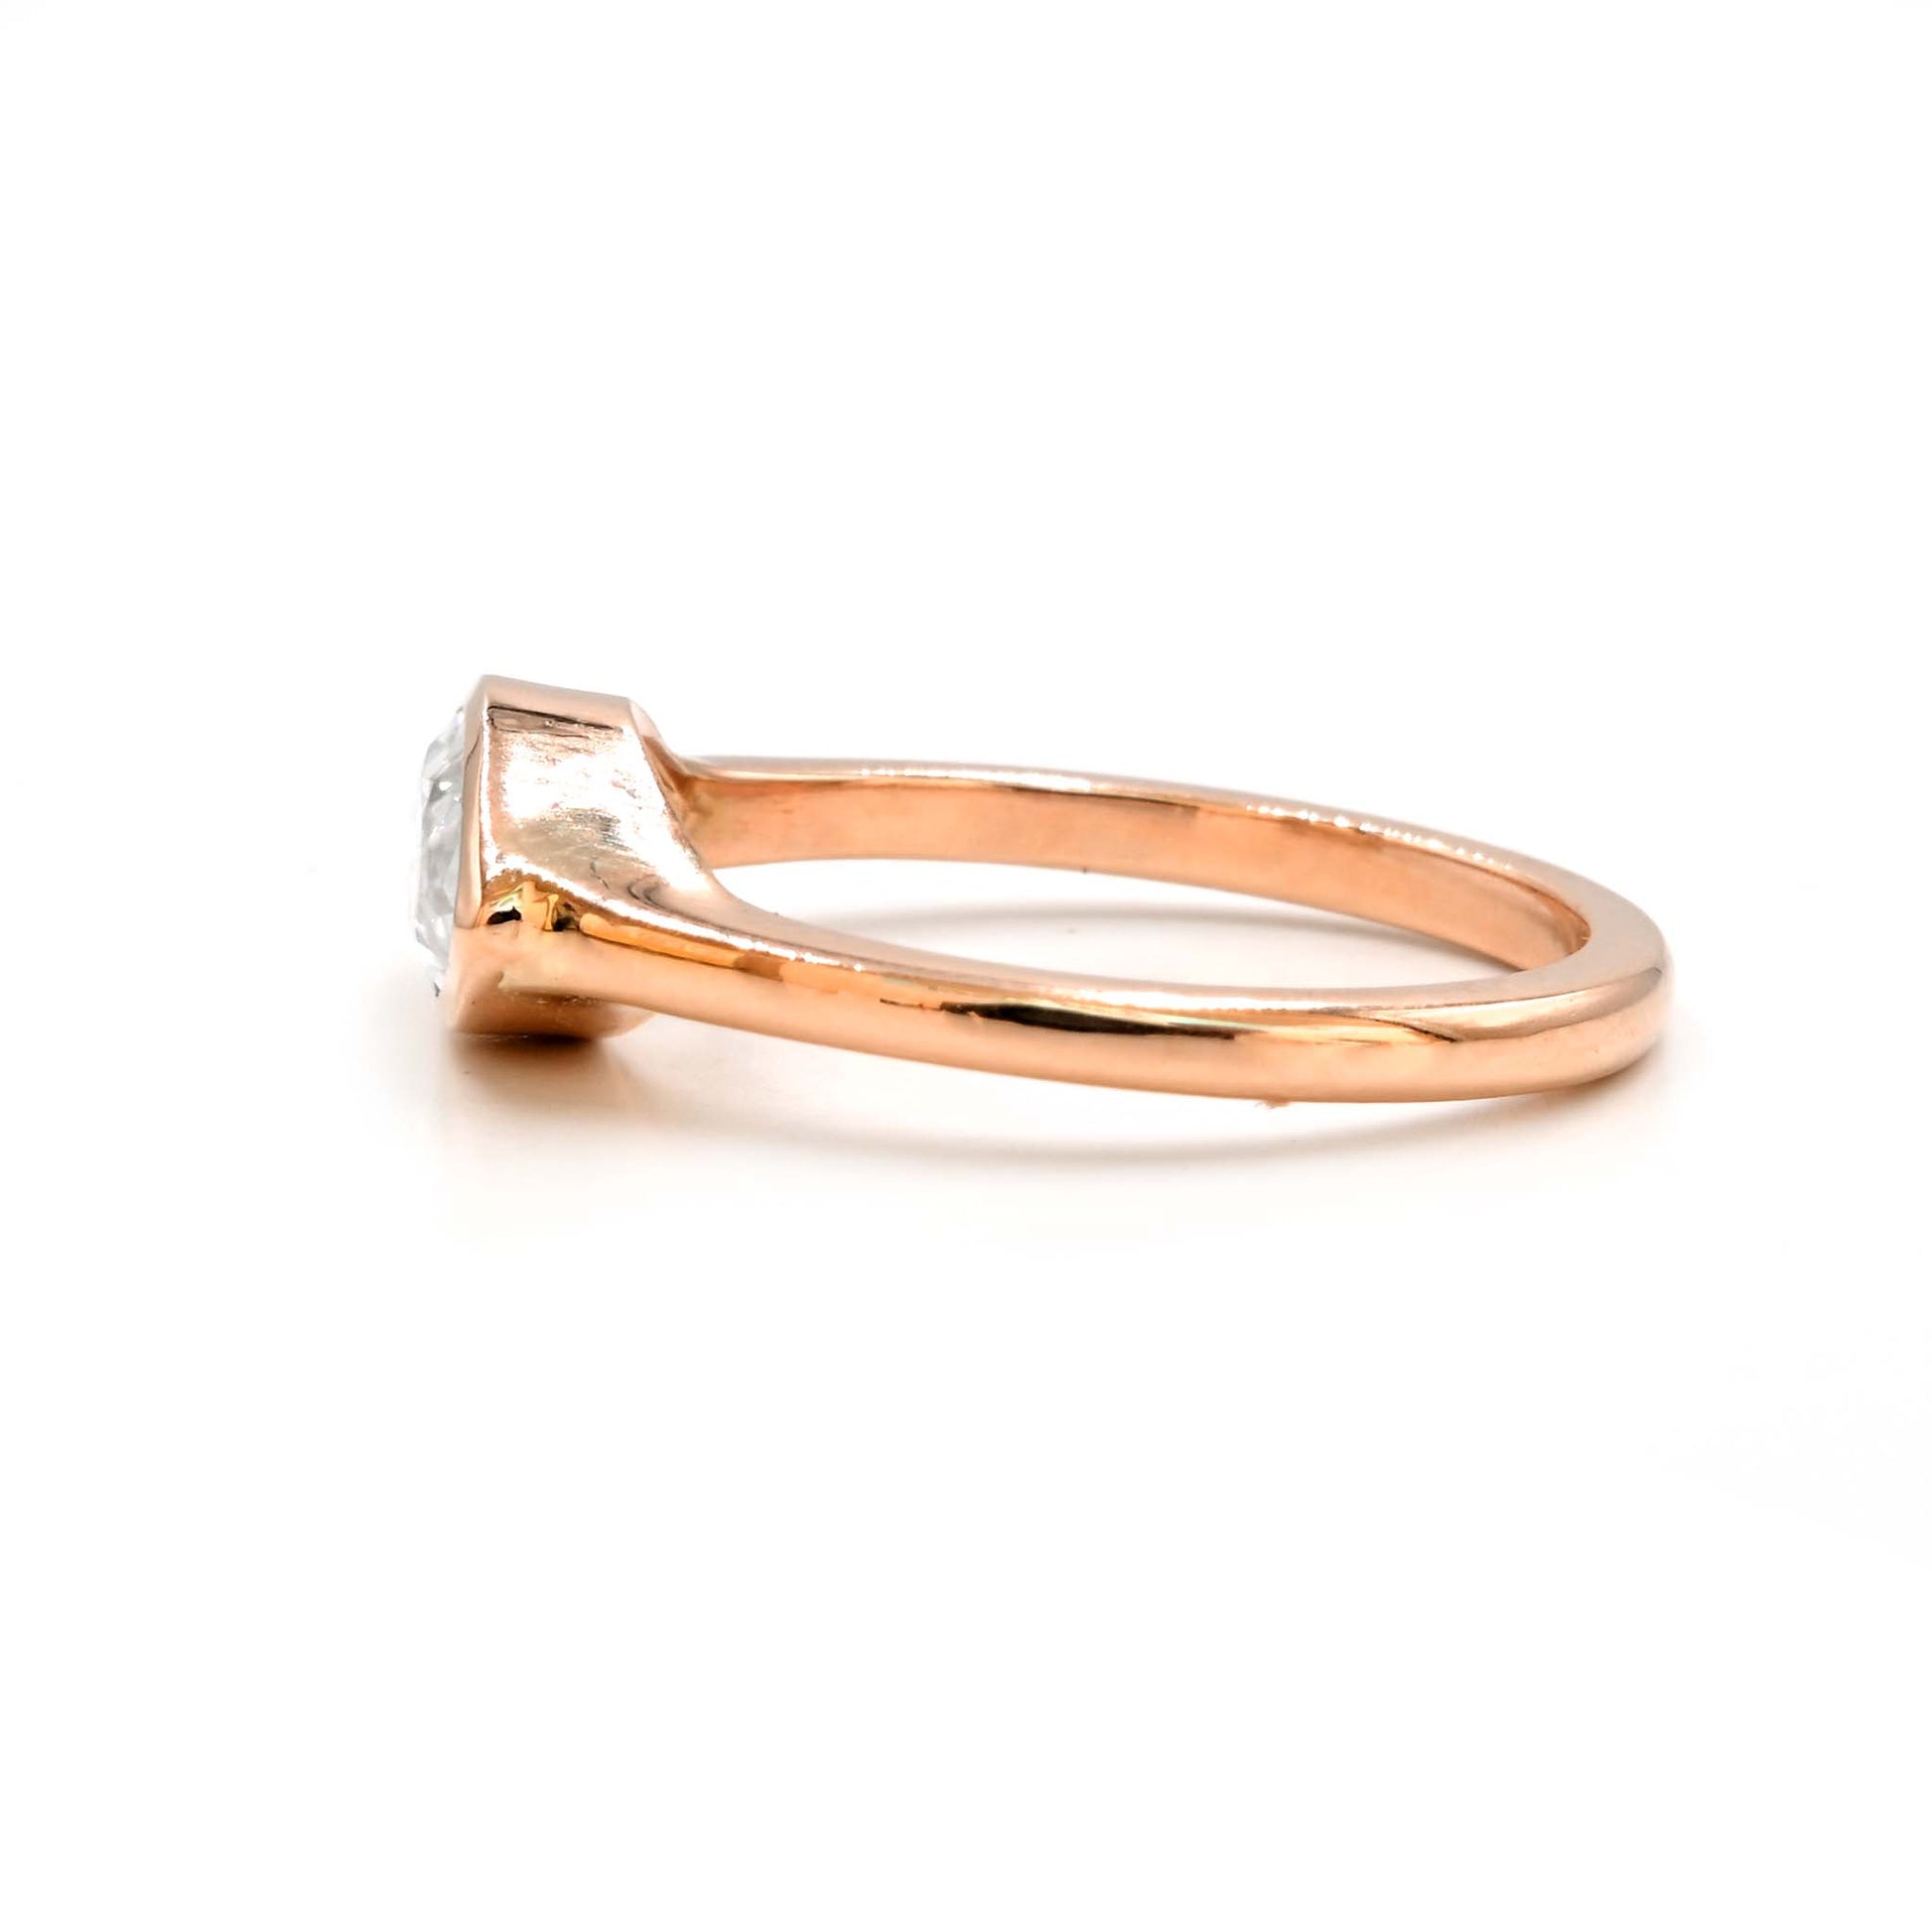 Eco-friendly marquise engagement ring with moissanite in 14k rosegold from Chiang Mai, Thailand